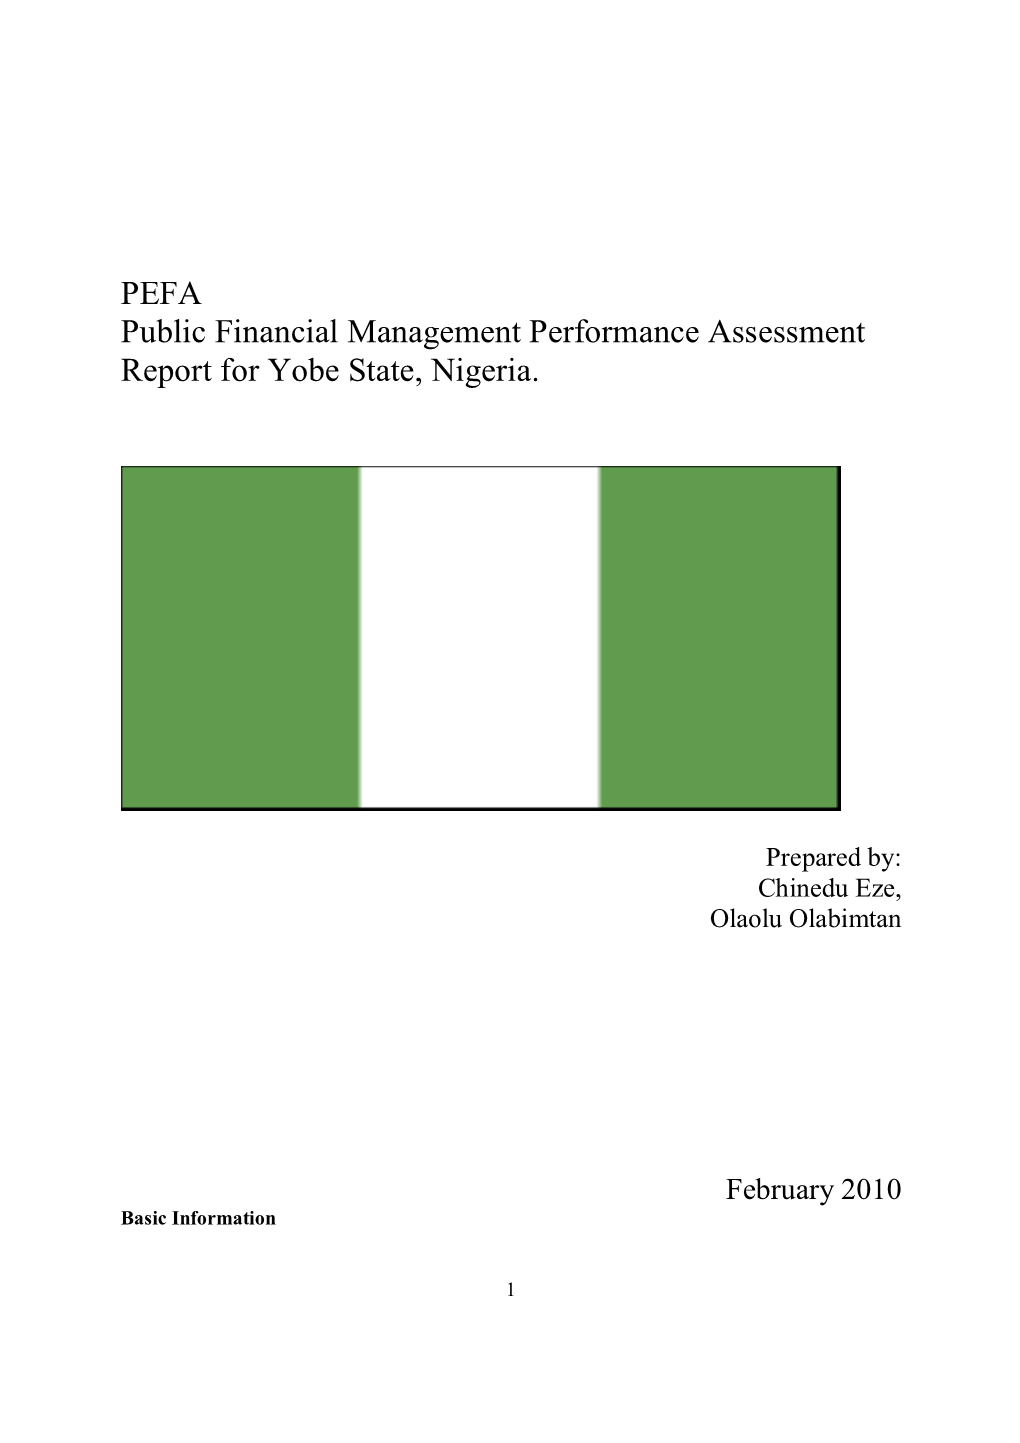 PEFA Public Financial Management Performance Assessment Report for Yobe State, Nigeria